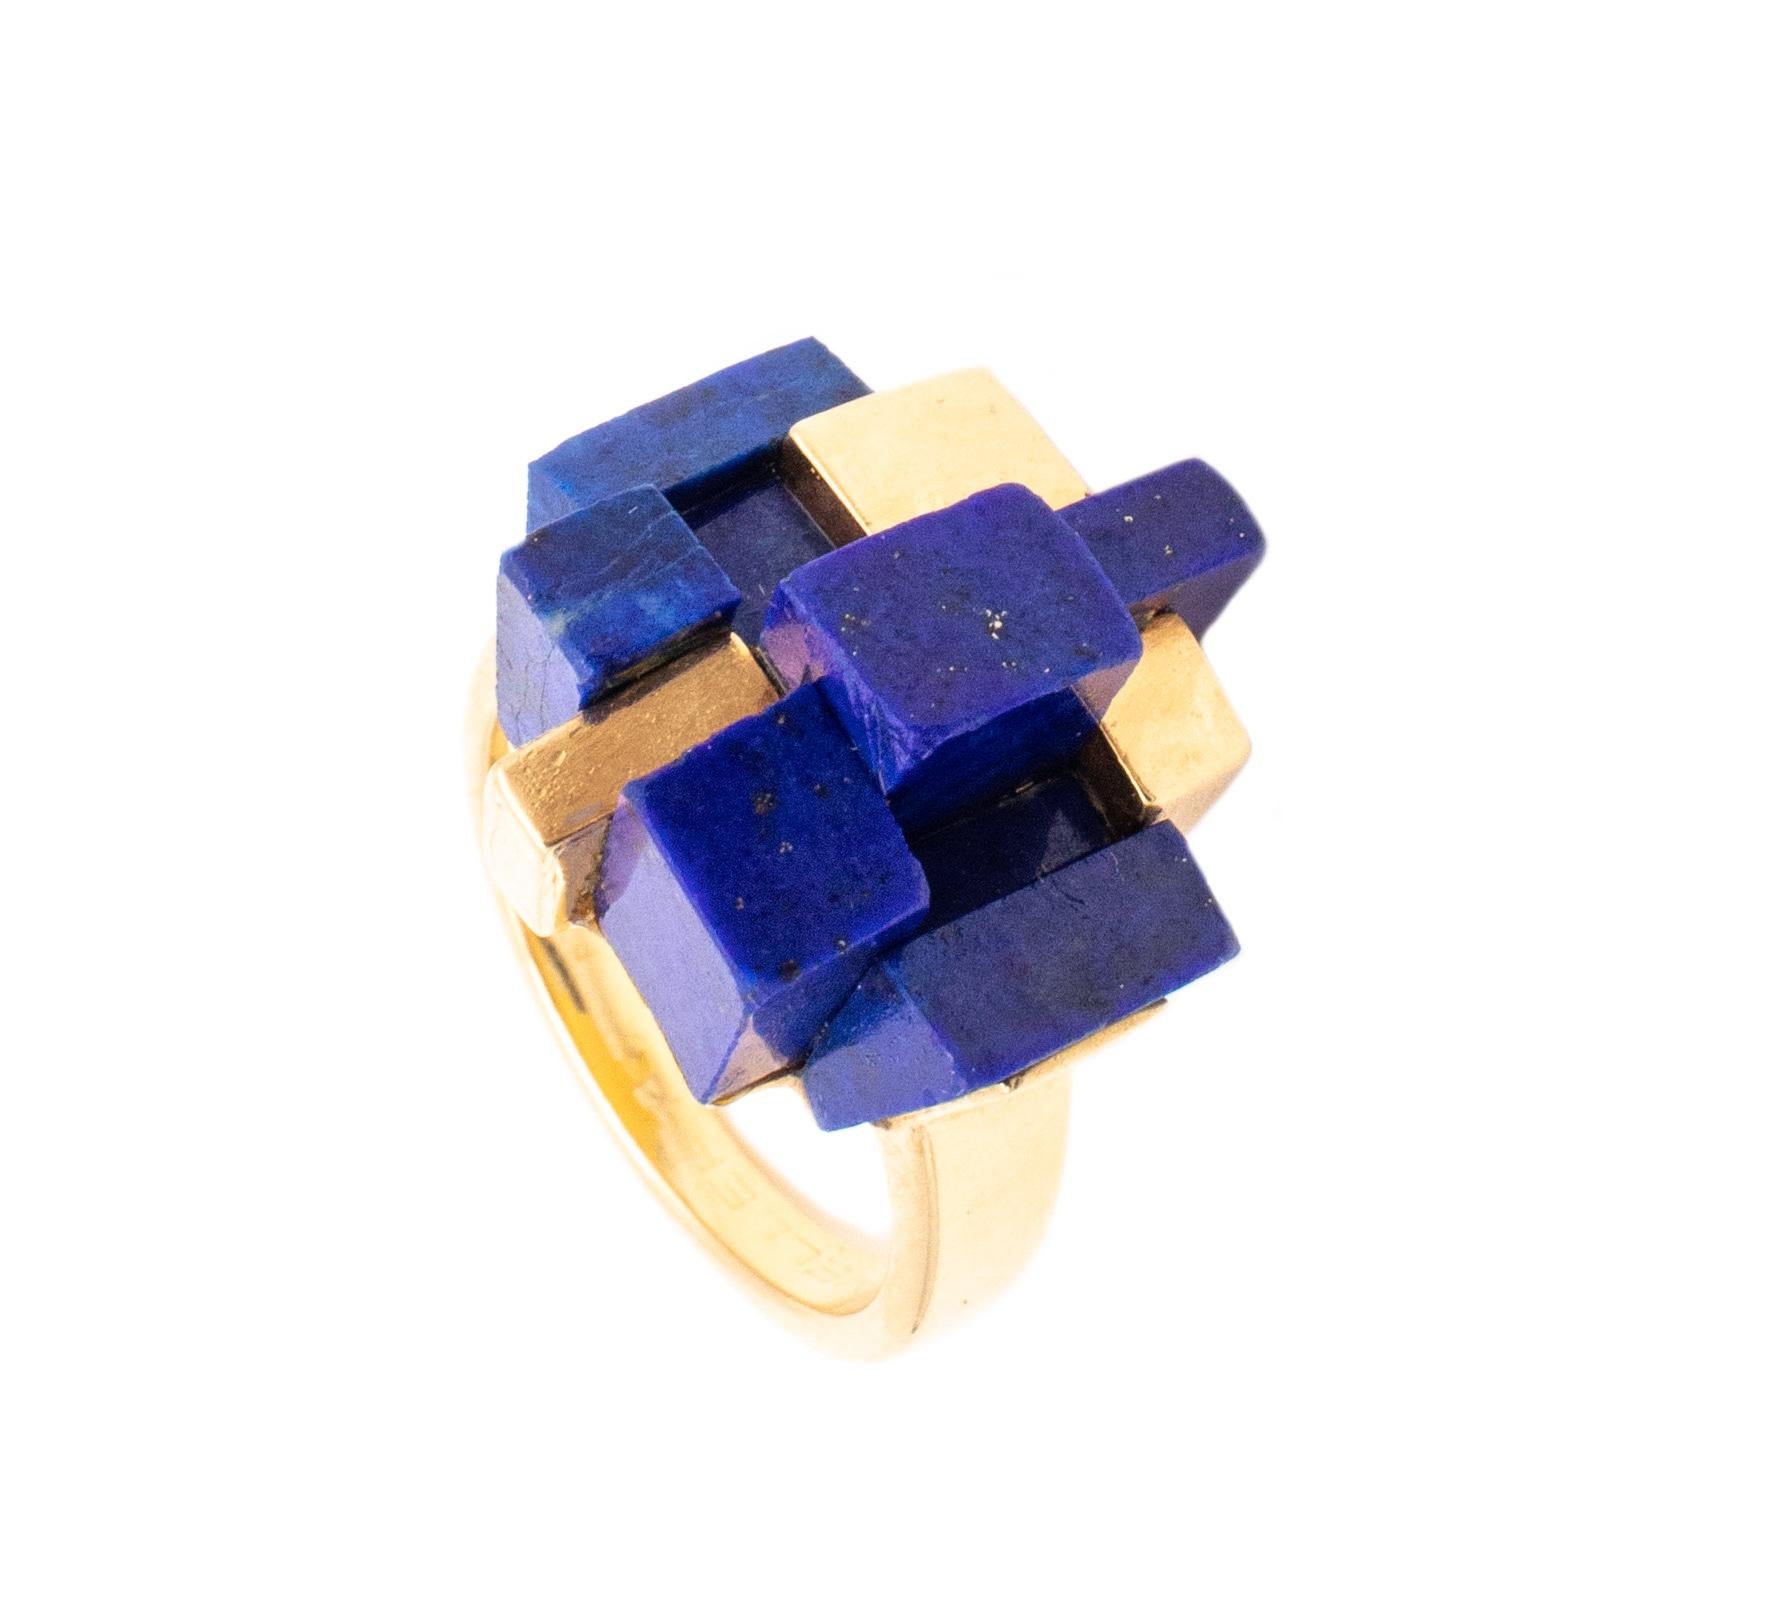 A very rare ring designed by Mellerio-Dits Meller.

Geometric sculptural piece, created in Paris France around the 60's and 70's. It was crafted by the renowned jewelry house of Mellerio in solid yellow gold of 18 karats

The design was conceived,